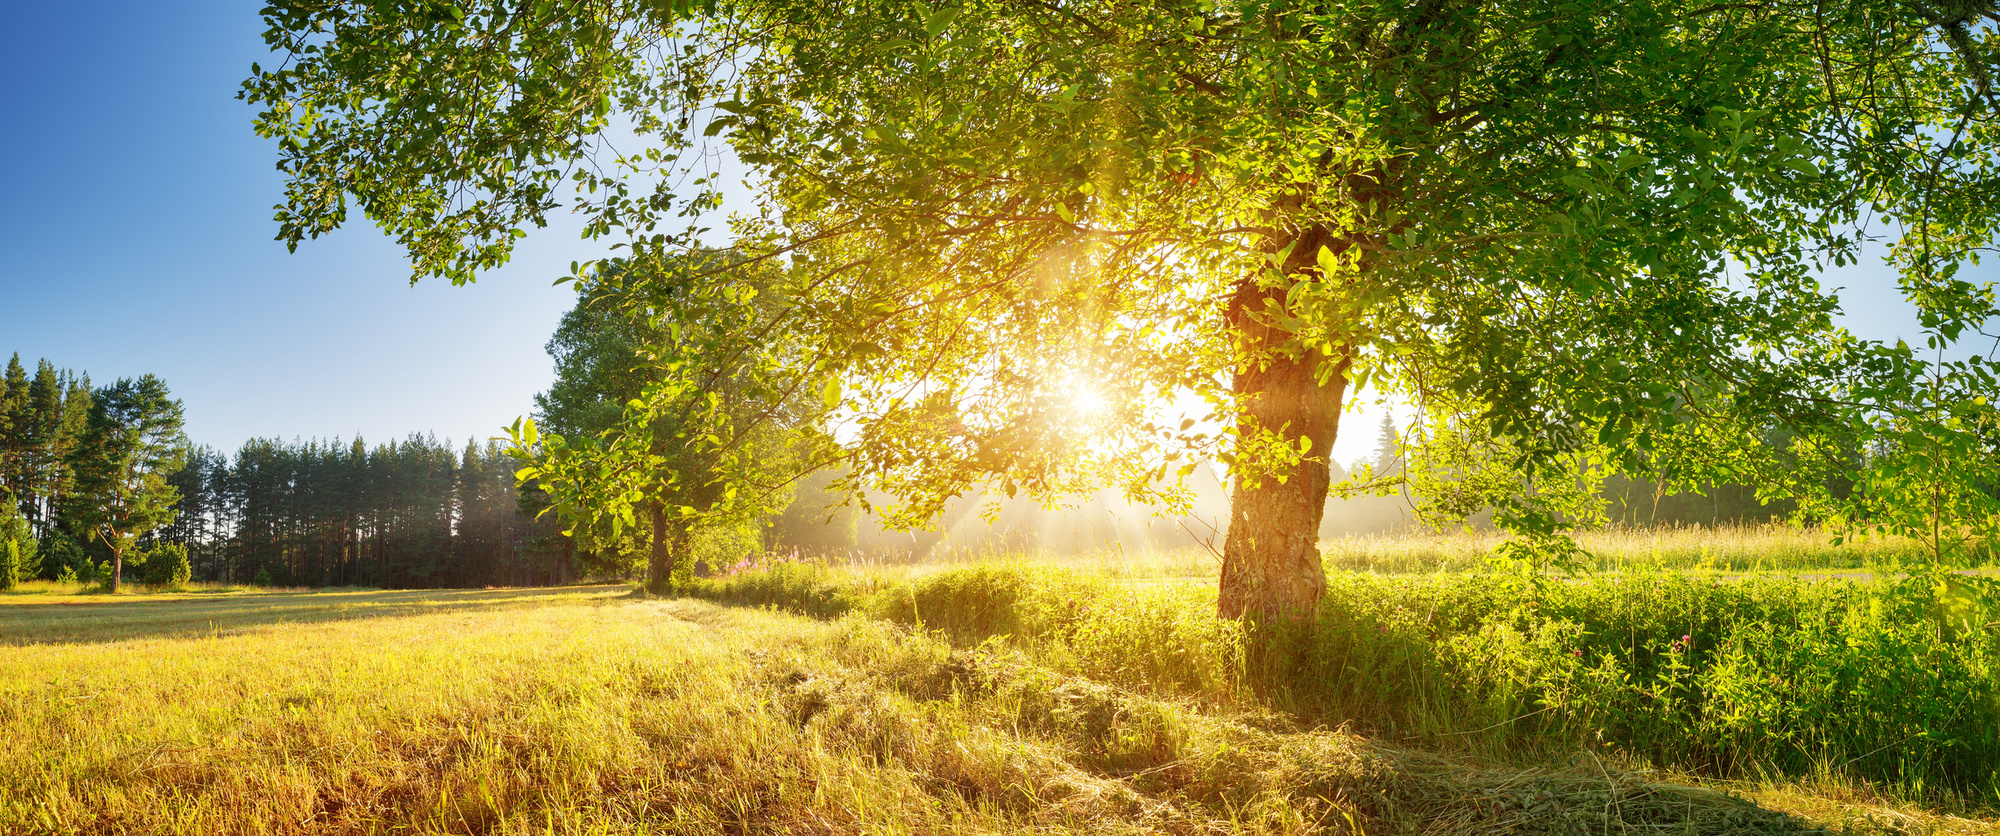 tree foliage in beautiful morning light with sunlight in summer. Sunrise on the field with hay, trees and sun tree foliage in beautiful morning light with sunlight in summer